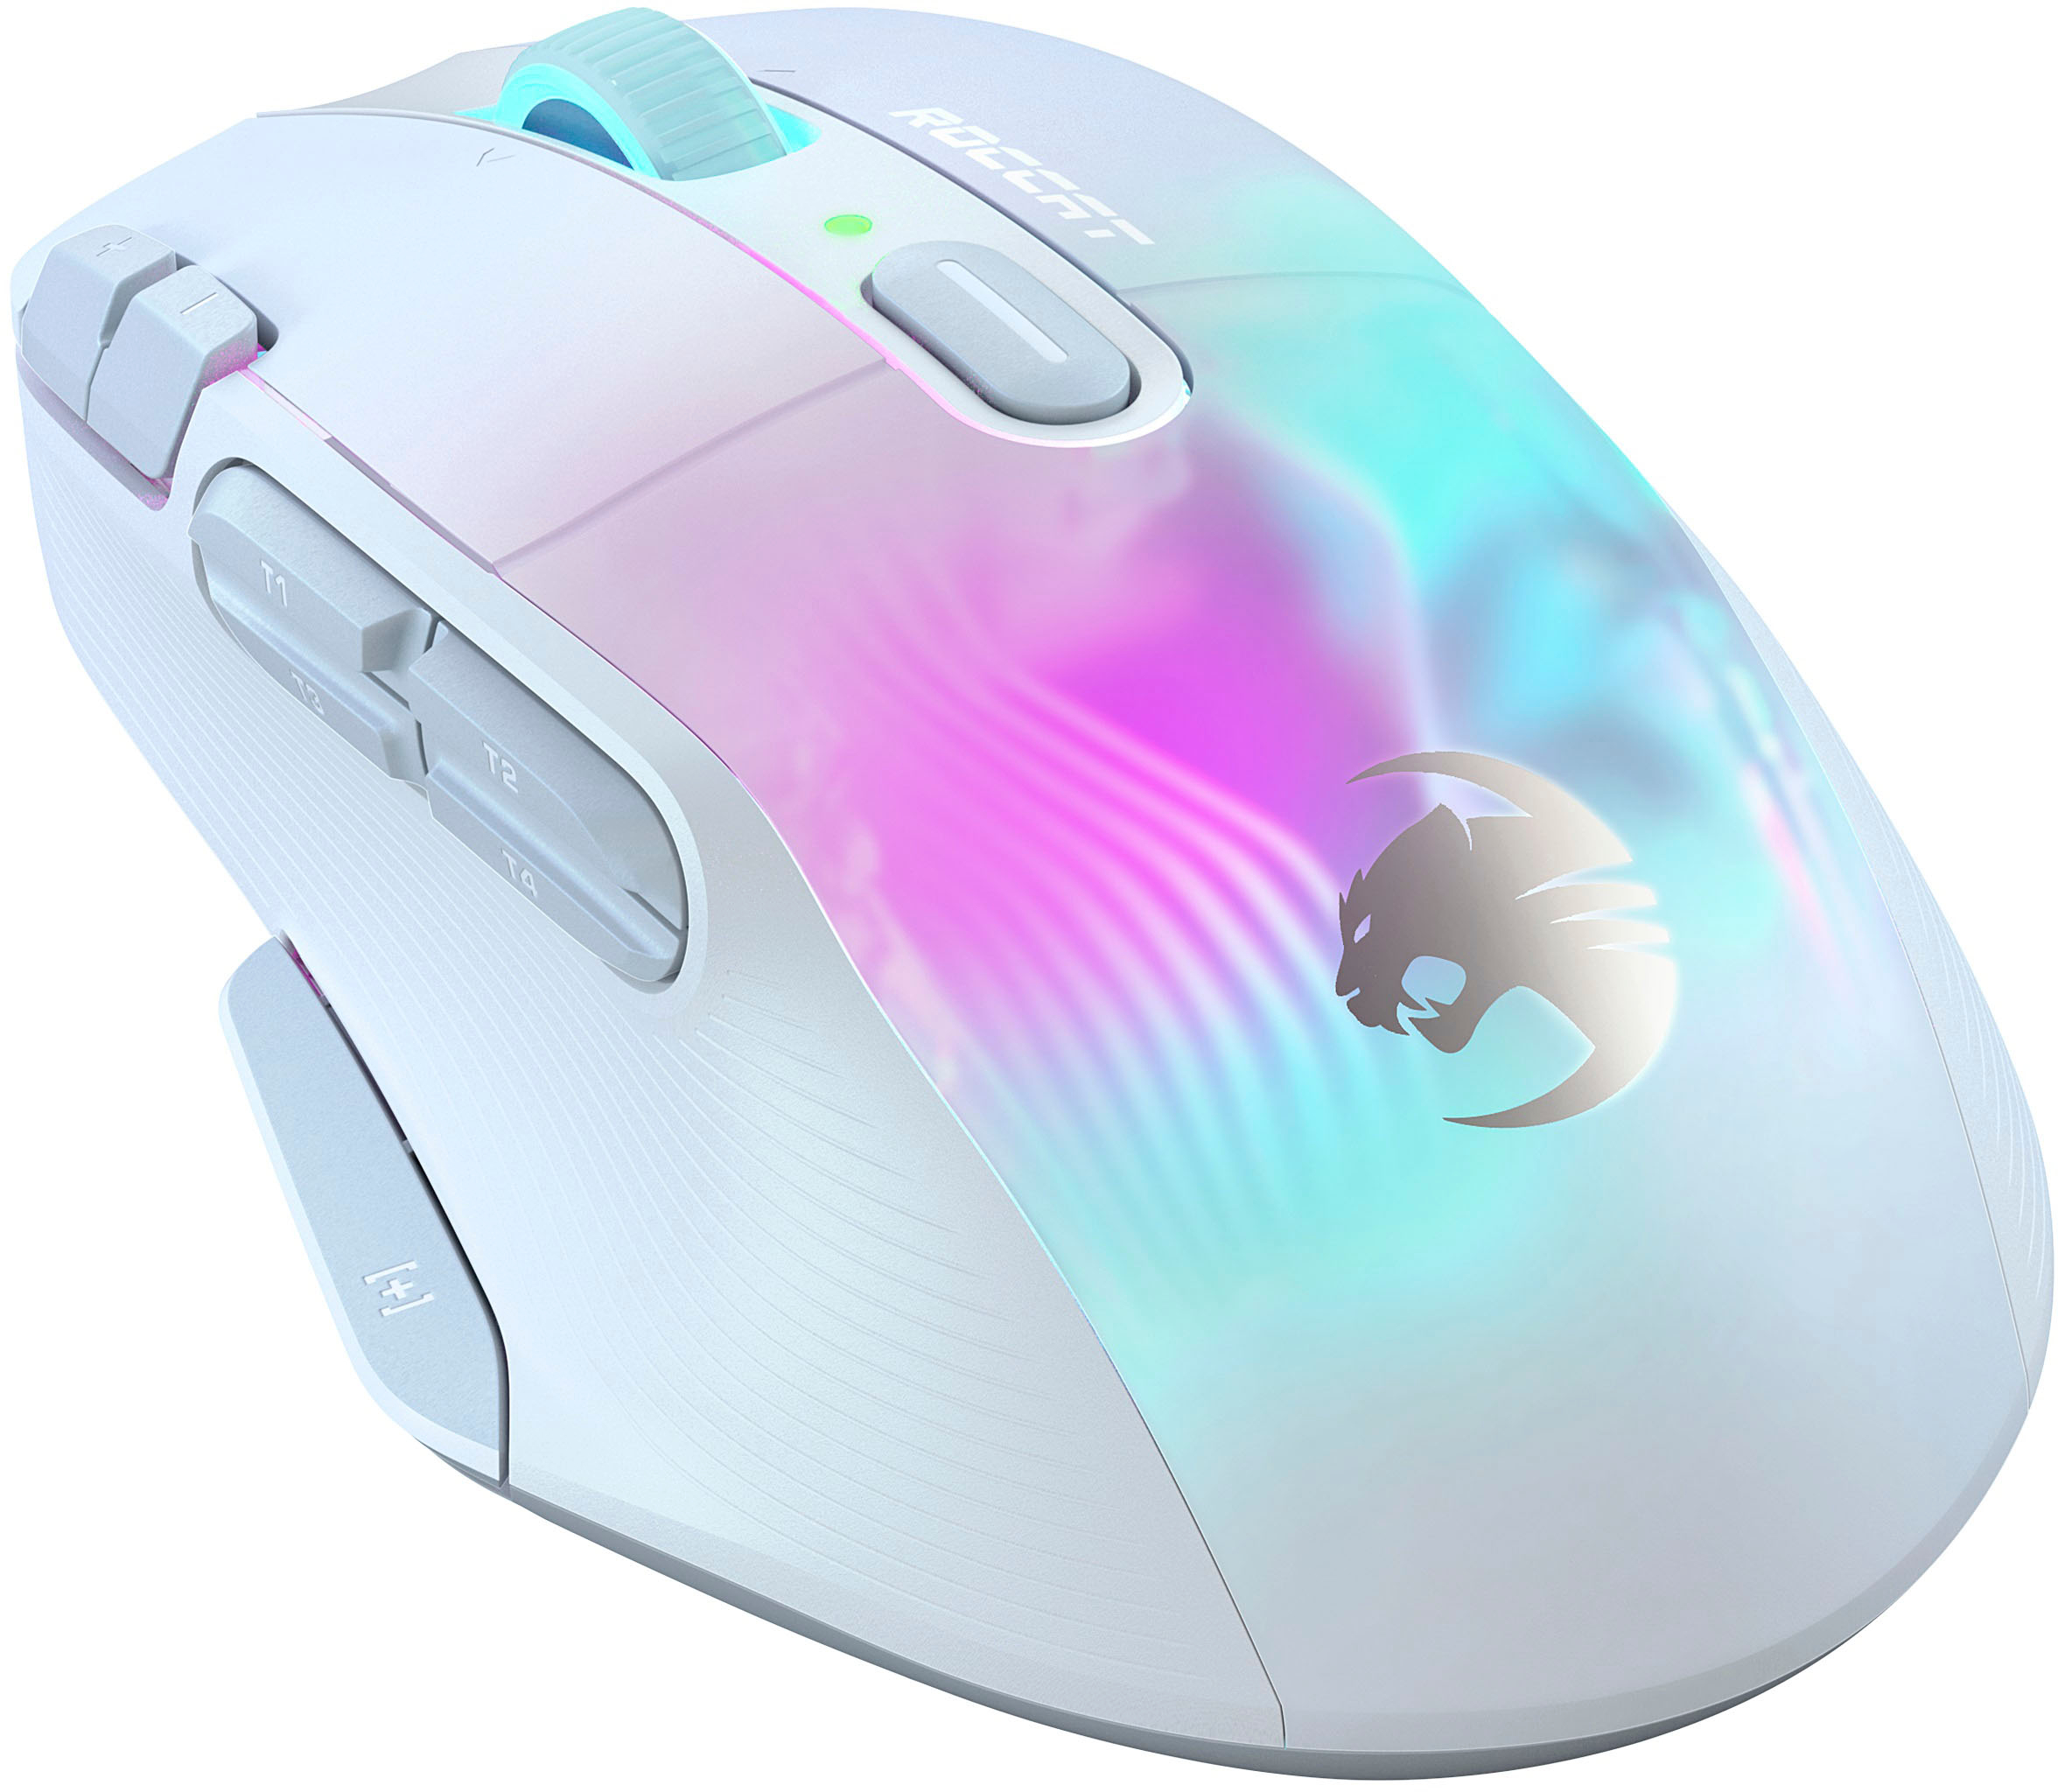 ROCCAT Kone XP Air Wireless Optical Gaming Mouse with Charging Dock and  AIMO RGB Lighting White ROC-11-446-01 - Best Buy